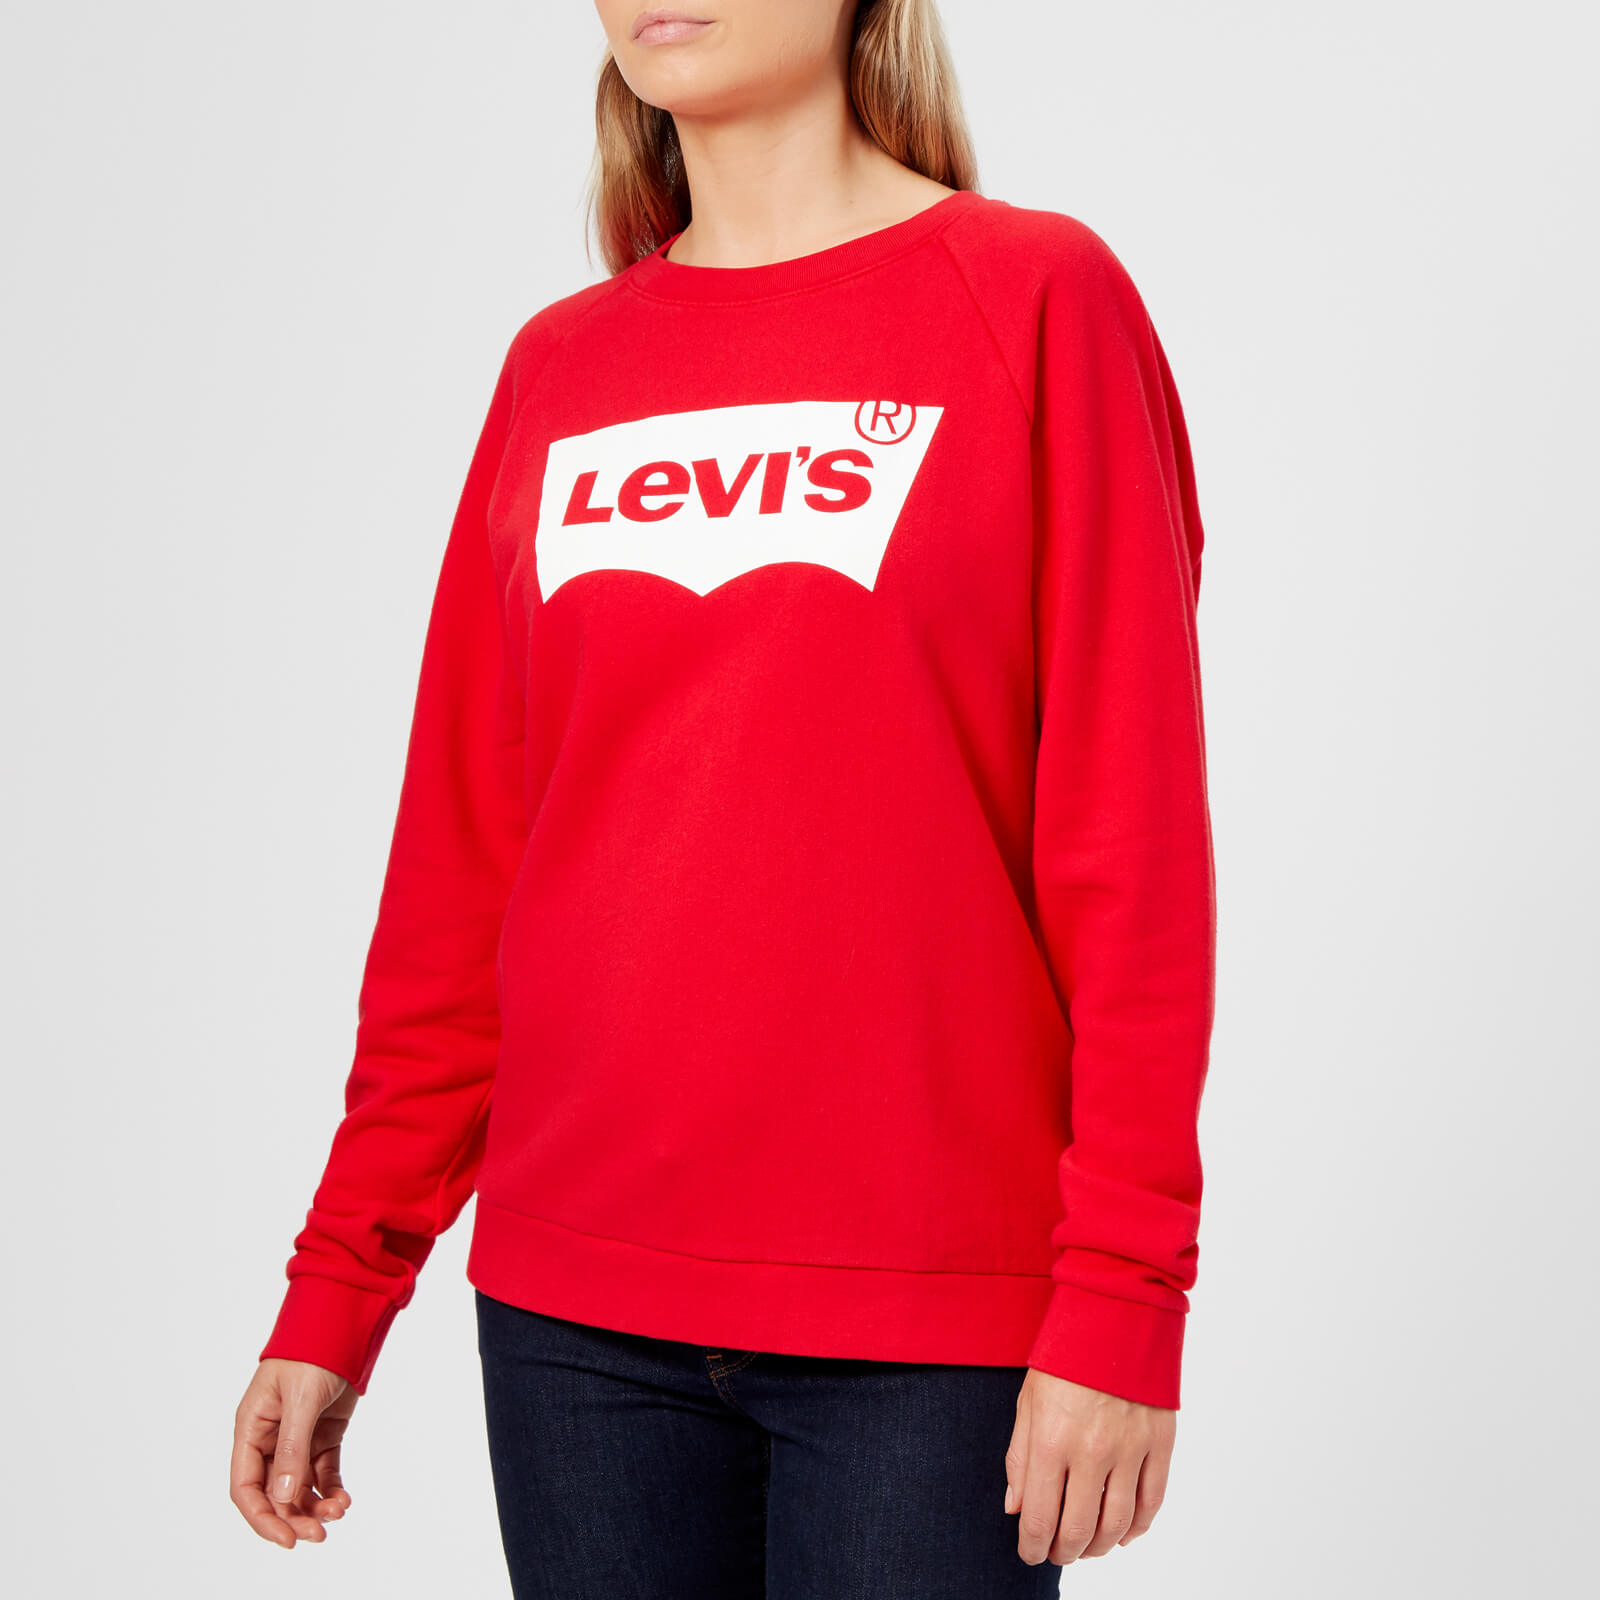 levi's red jumper Cheaper Than Retail 